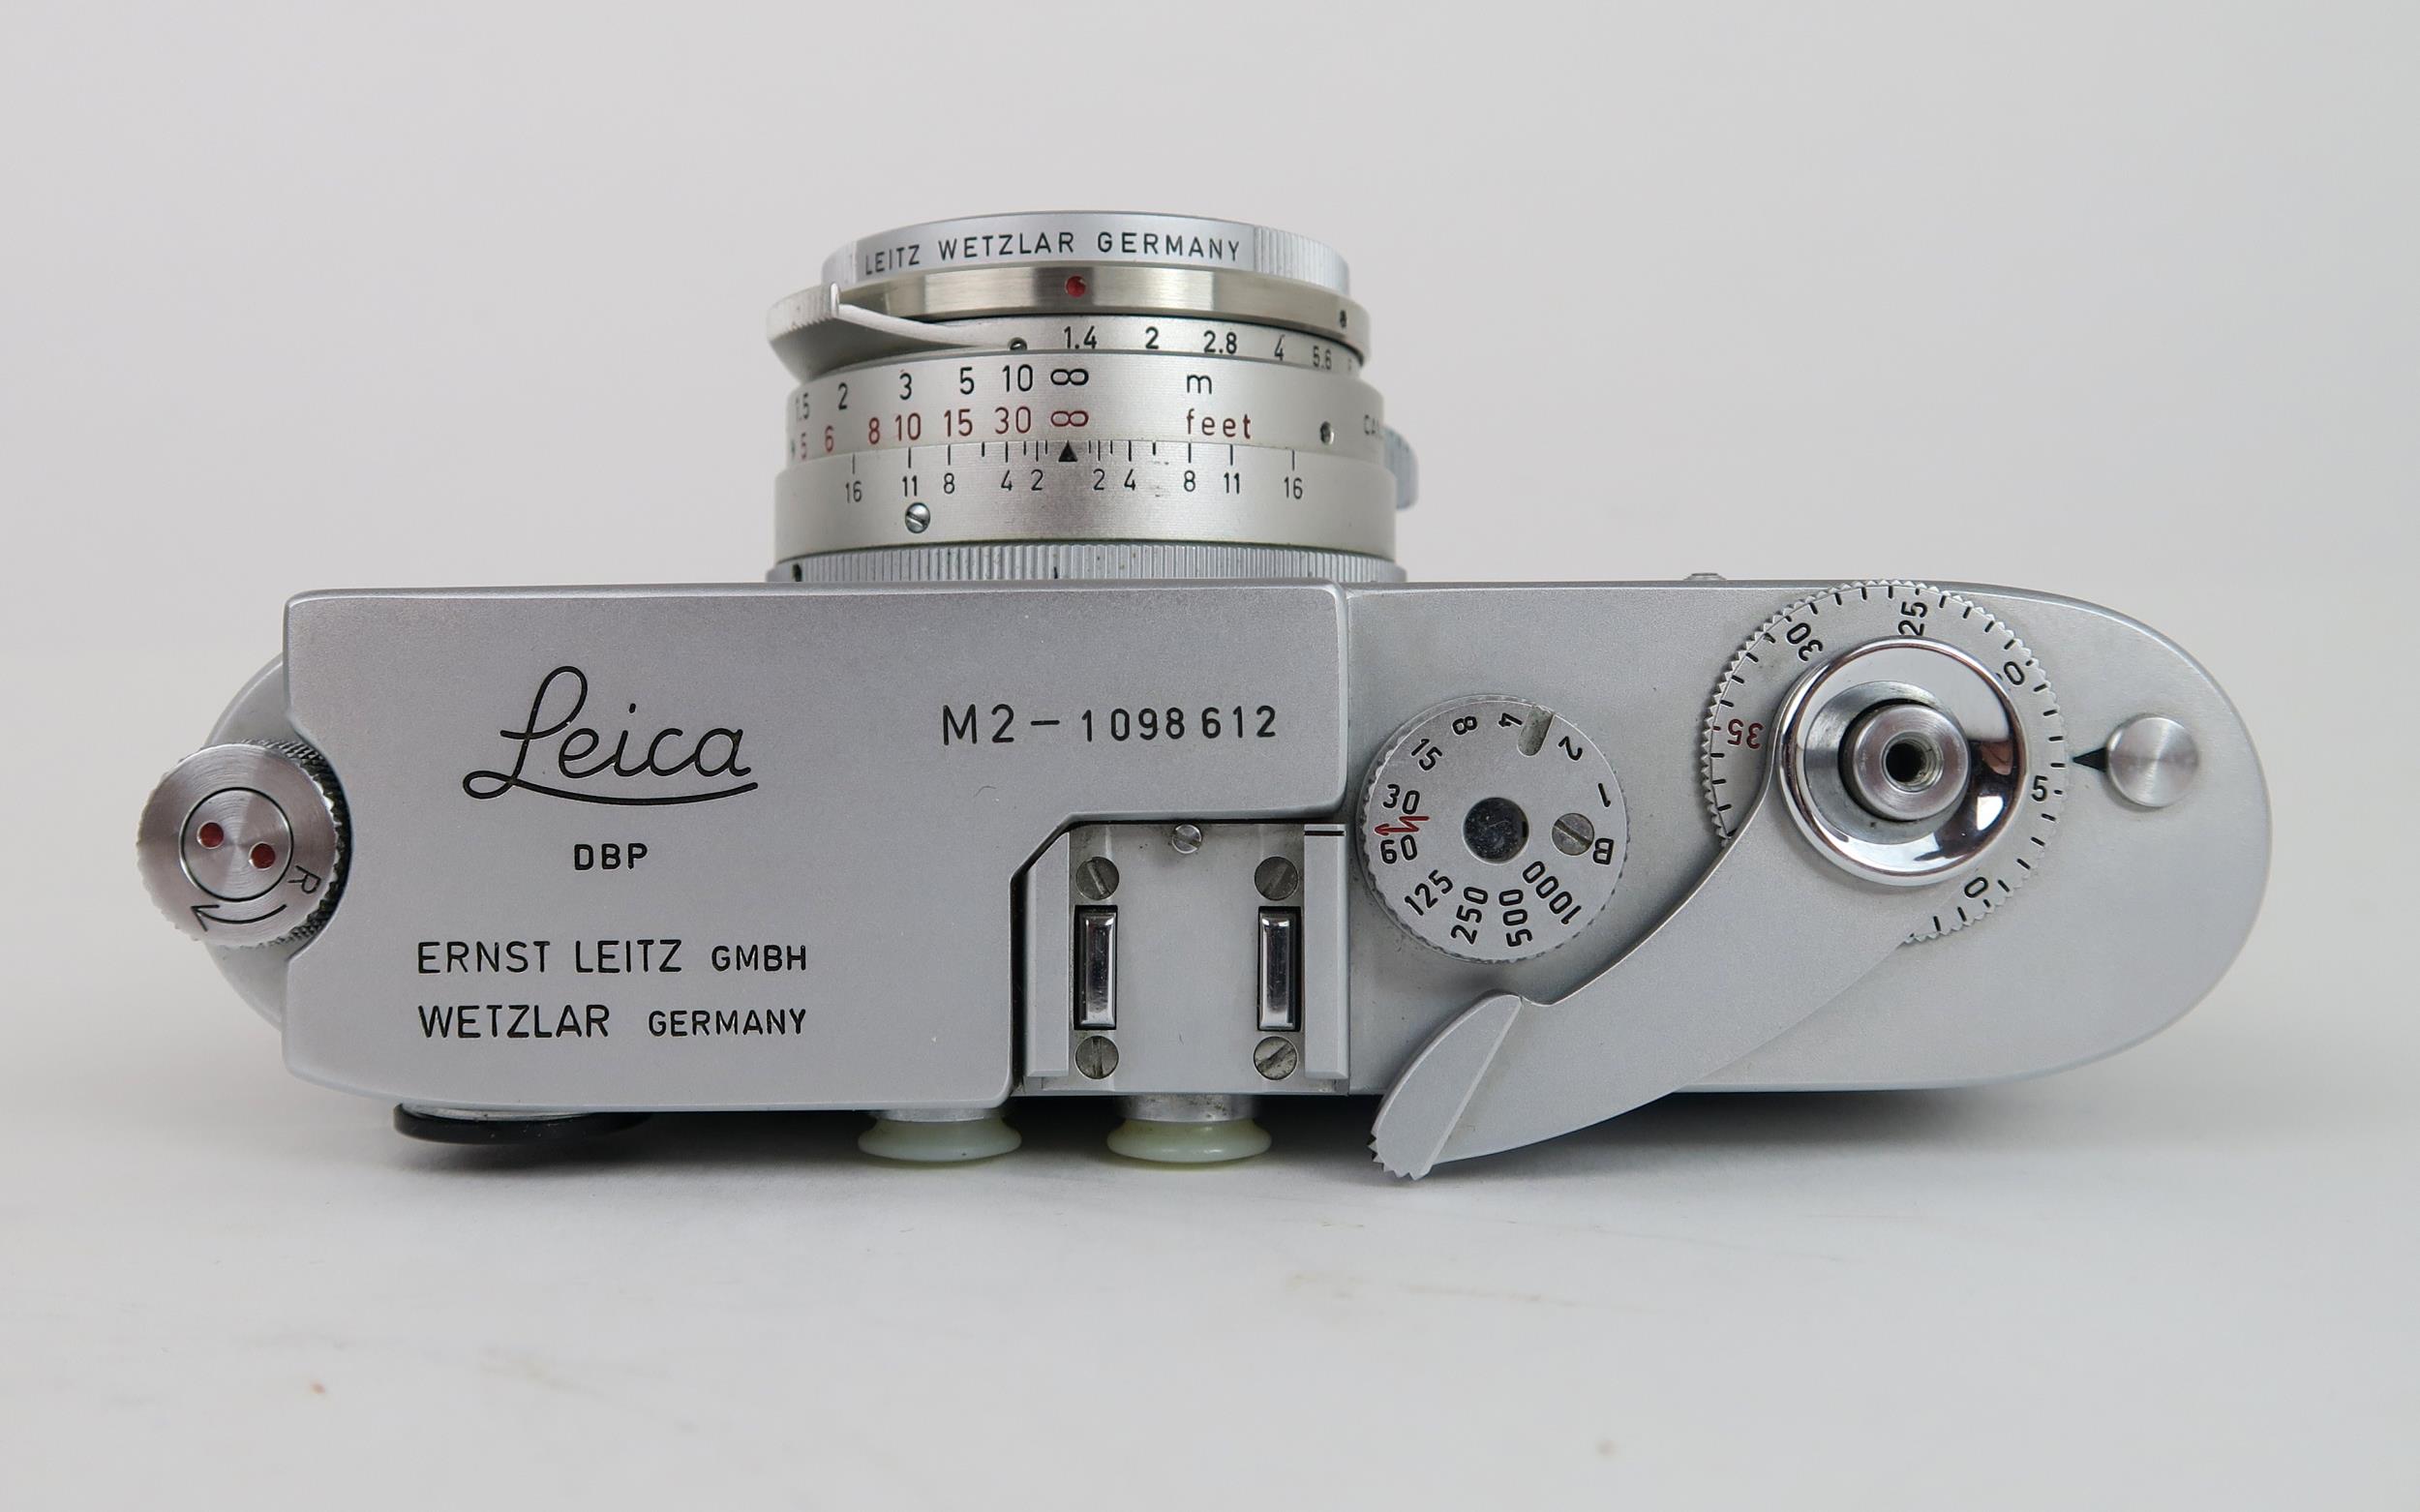 A 1964 LEITZ LEICA M2 RANGEFINDER CAMERA FITTED WITH A LEITZ SUMMILUX 1:1.4/35 LENS Serial no. - Image 4 of 4